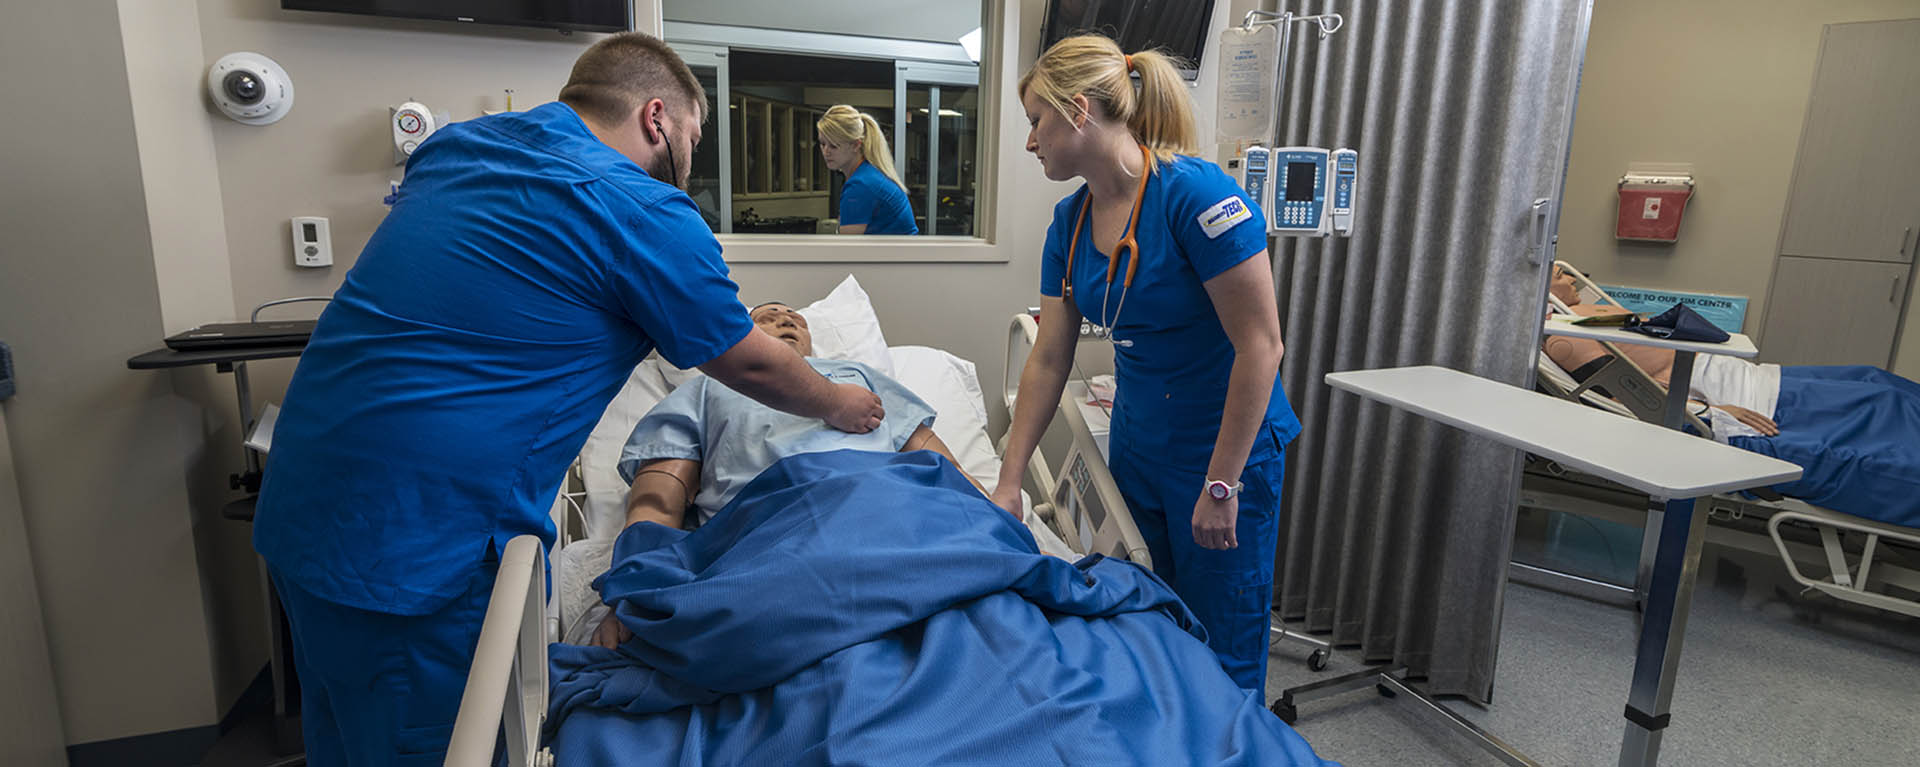 two nursing students in hospital bay